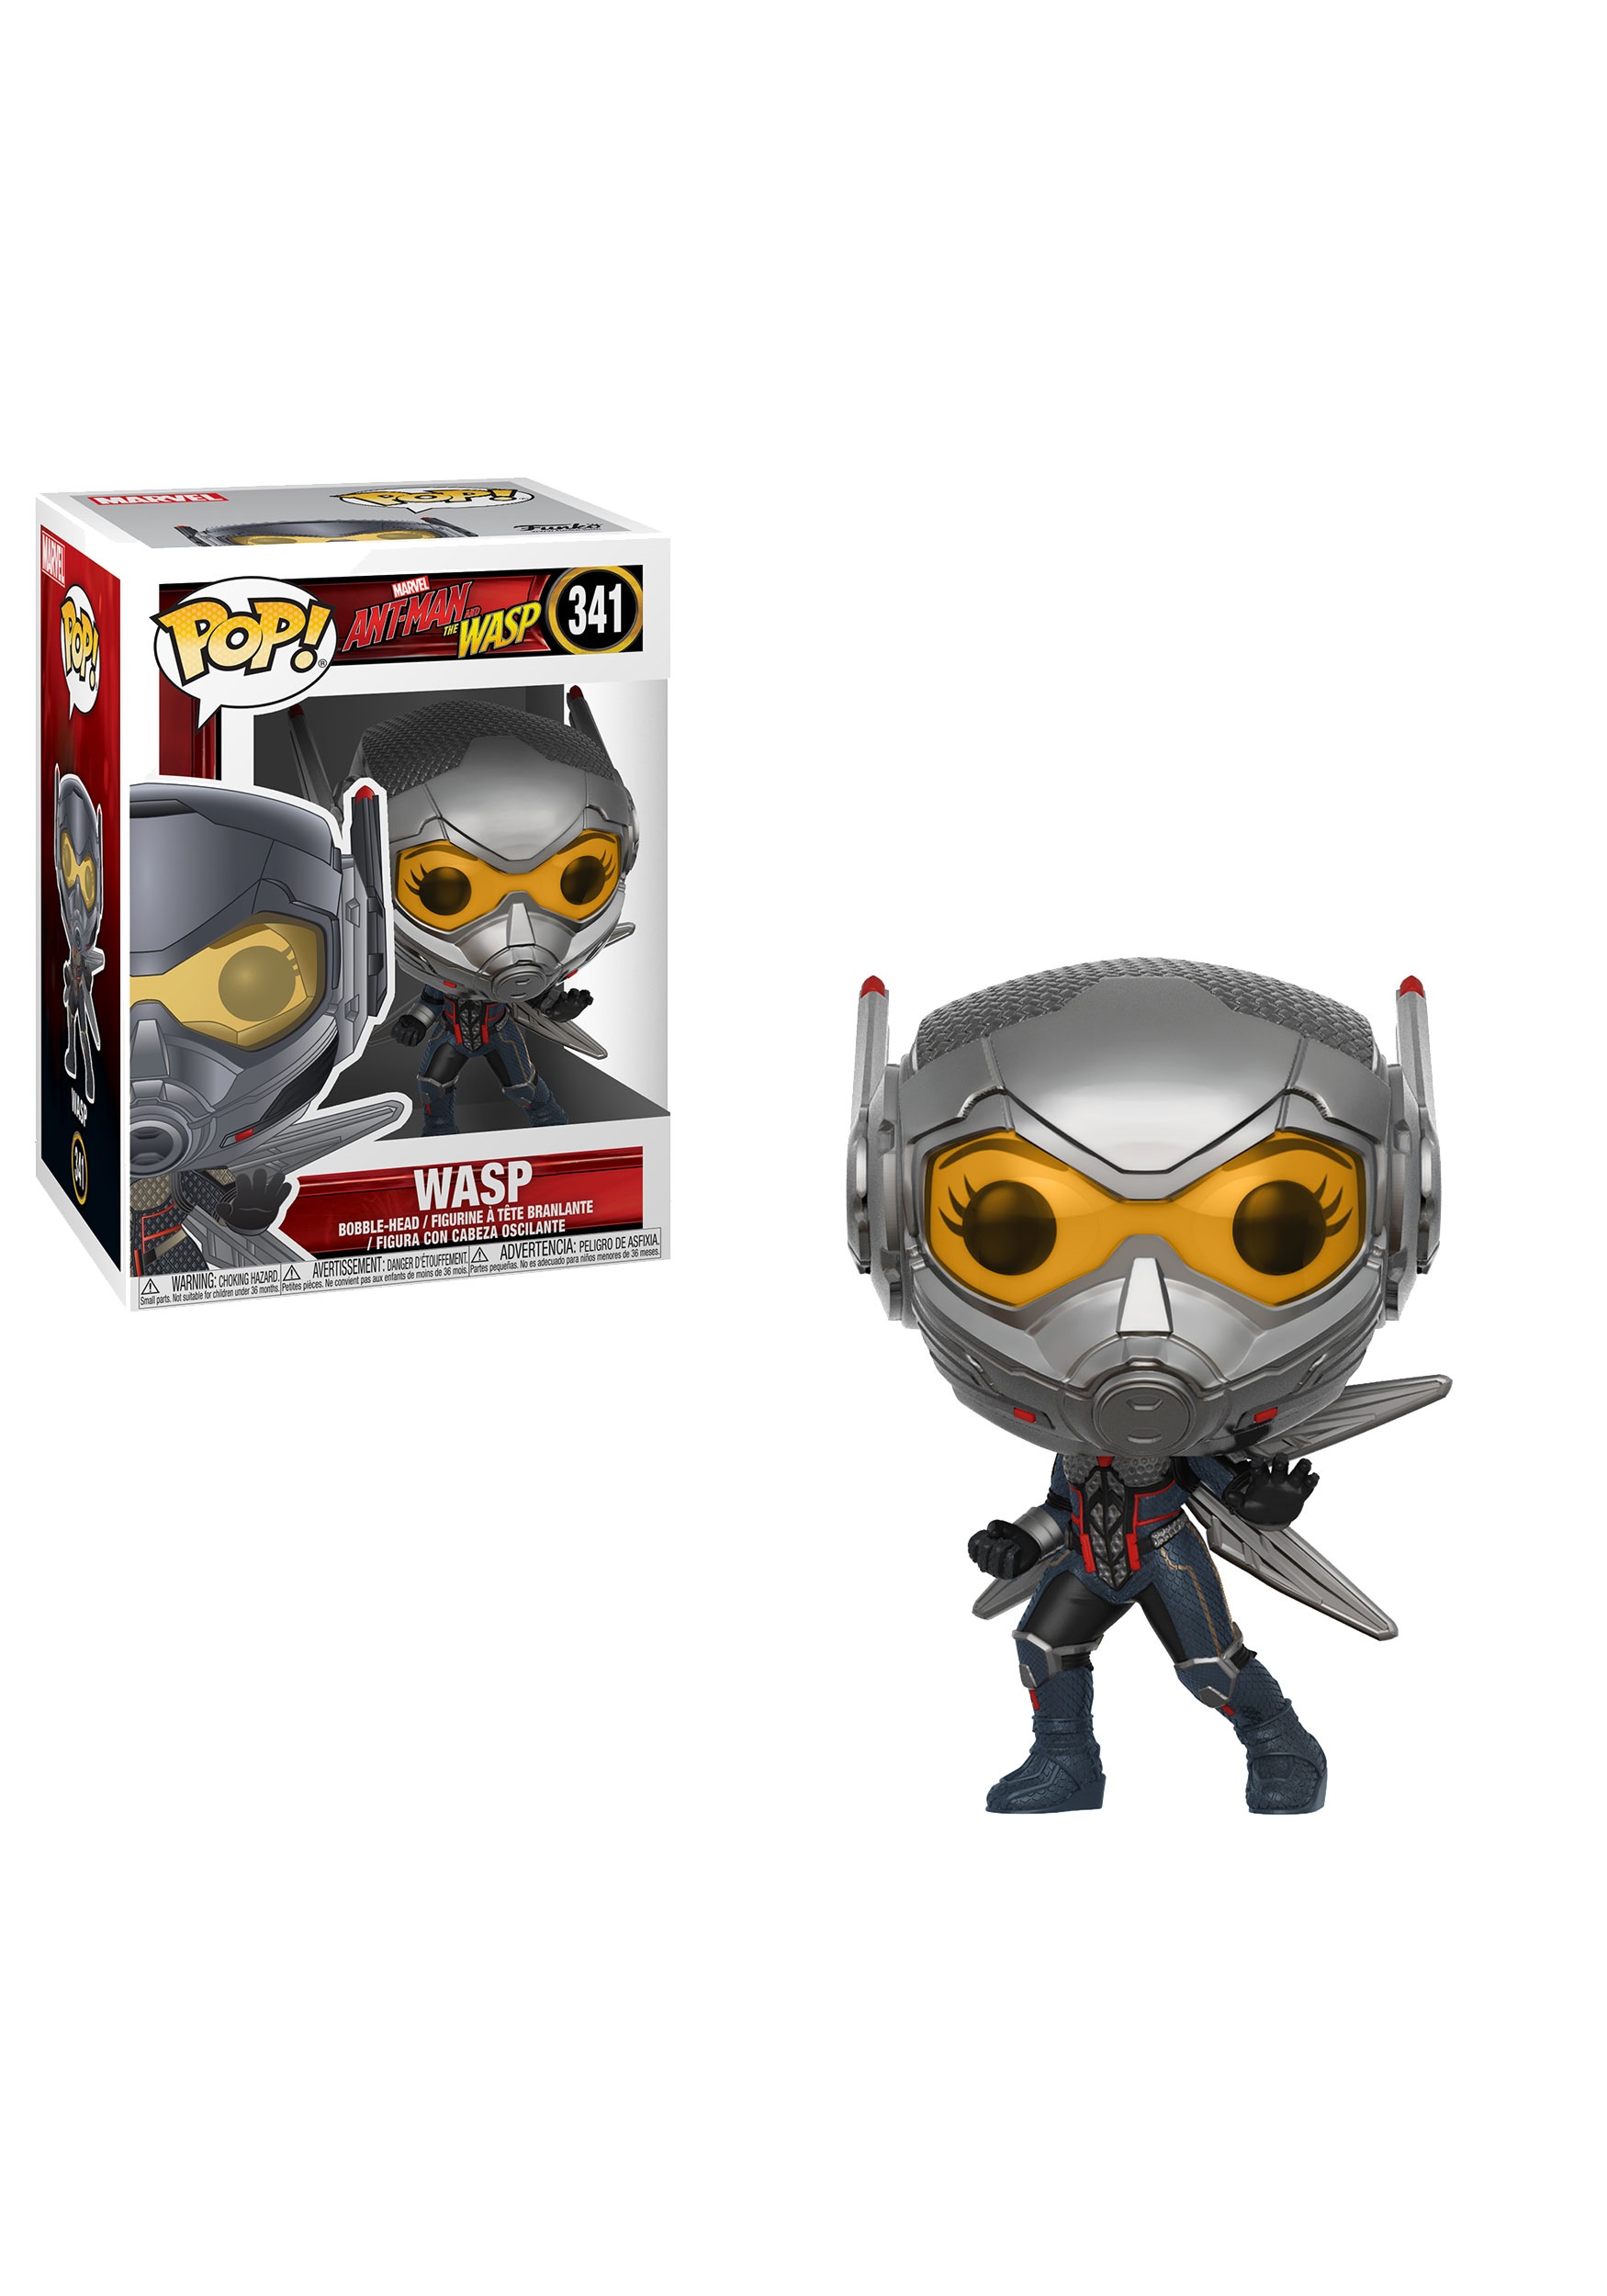 POP! Marvel: Ant-Man & The Wasp- Wasp Bobblehead Figure